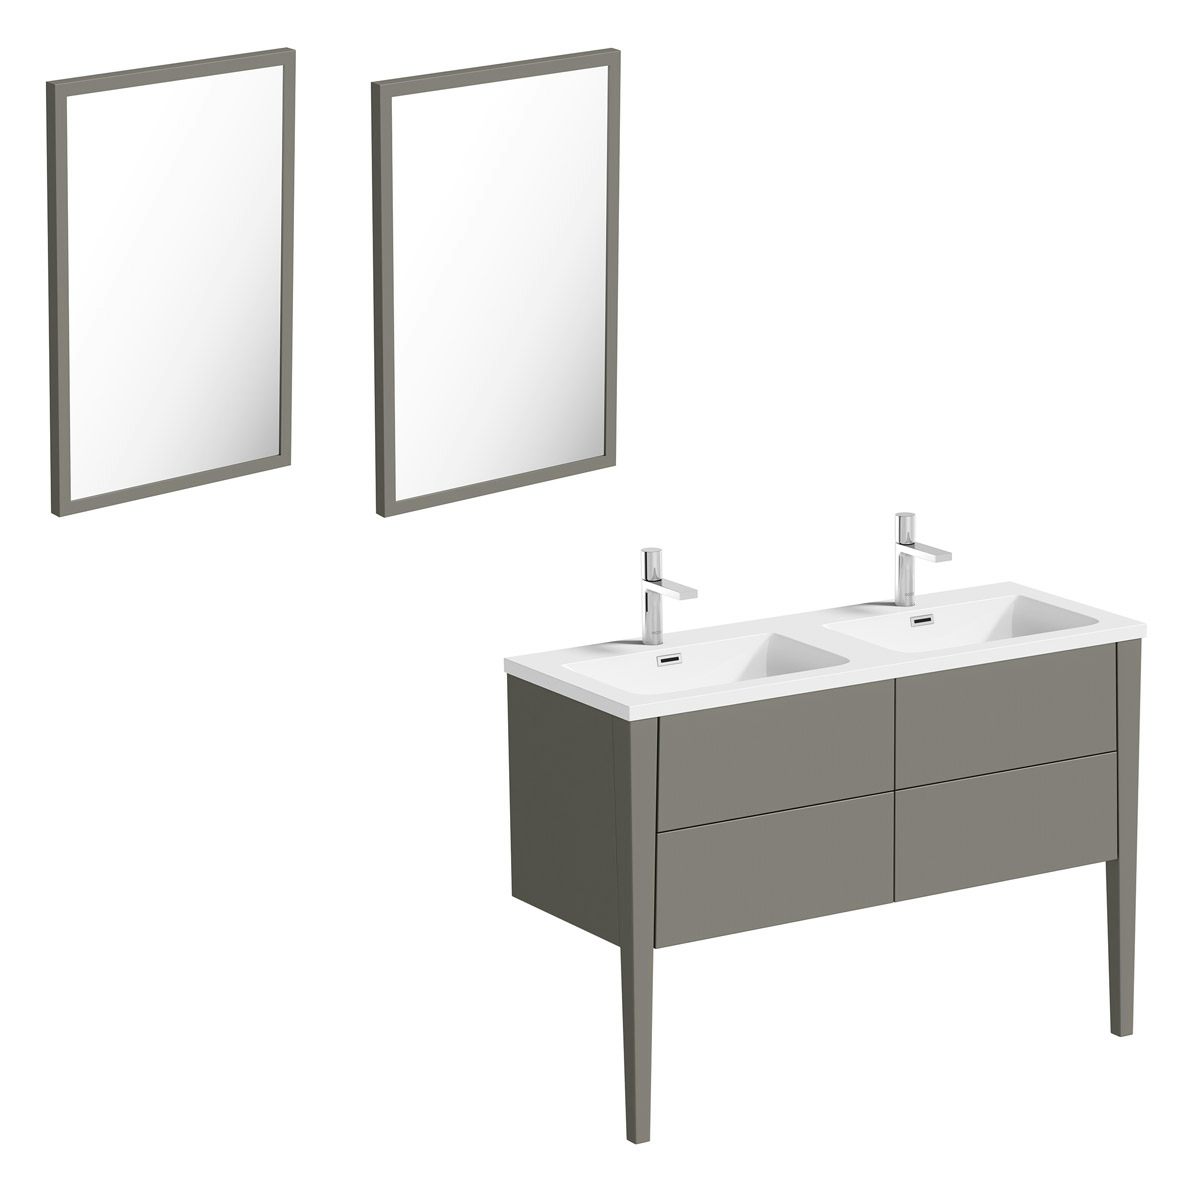 Mode Hale grey-stone matt wall hung double vanity unit and basin 1200mm with mirrors